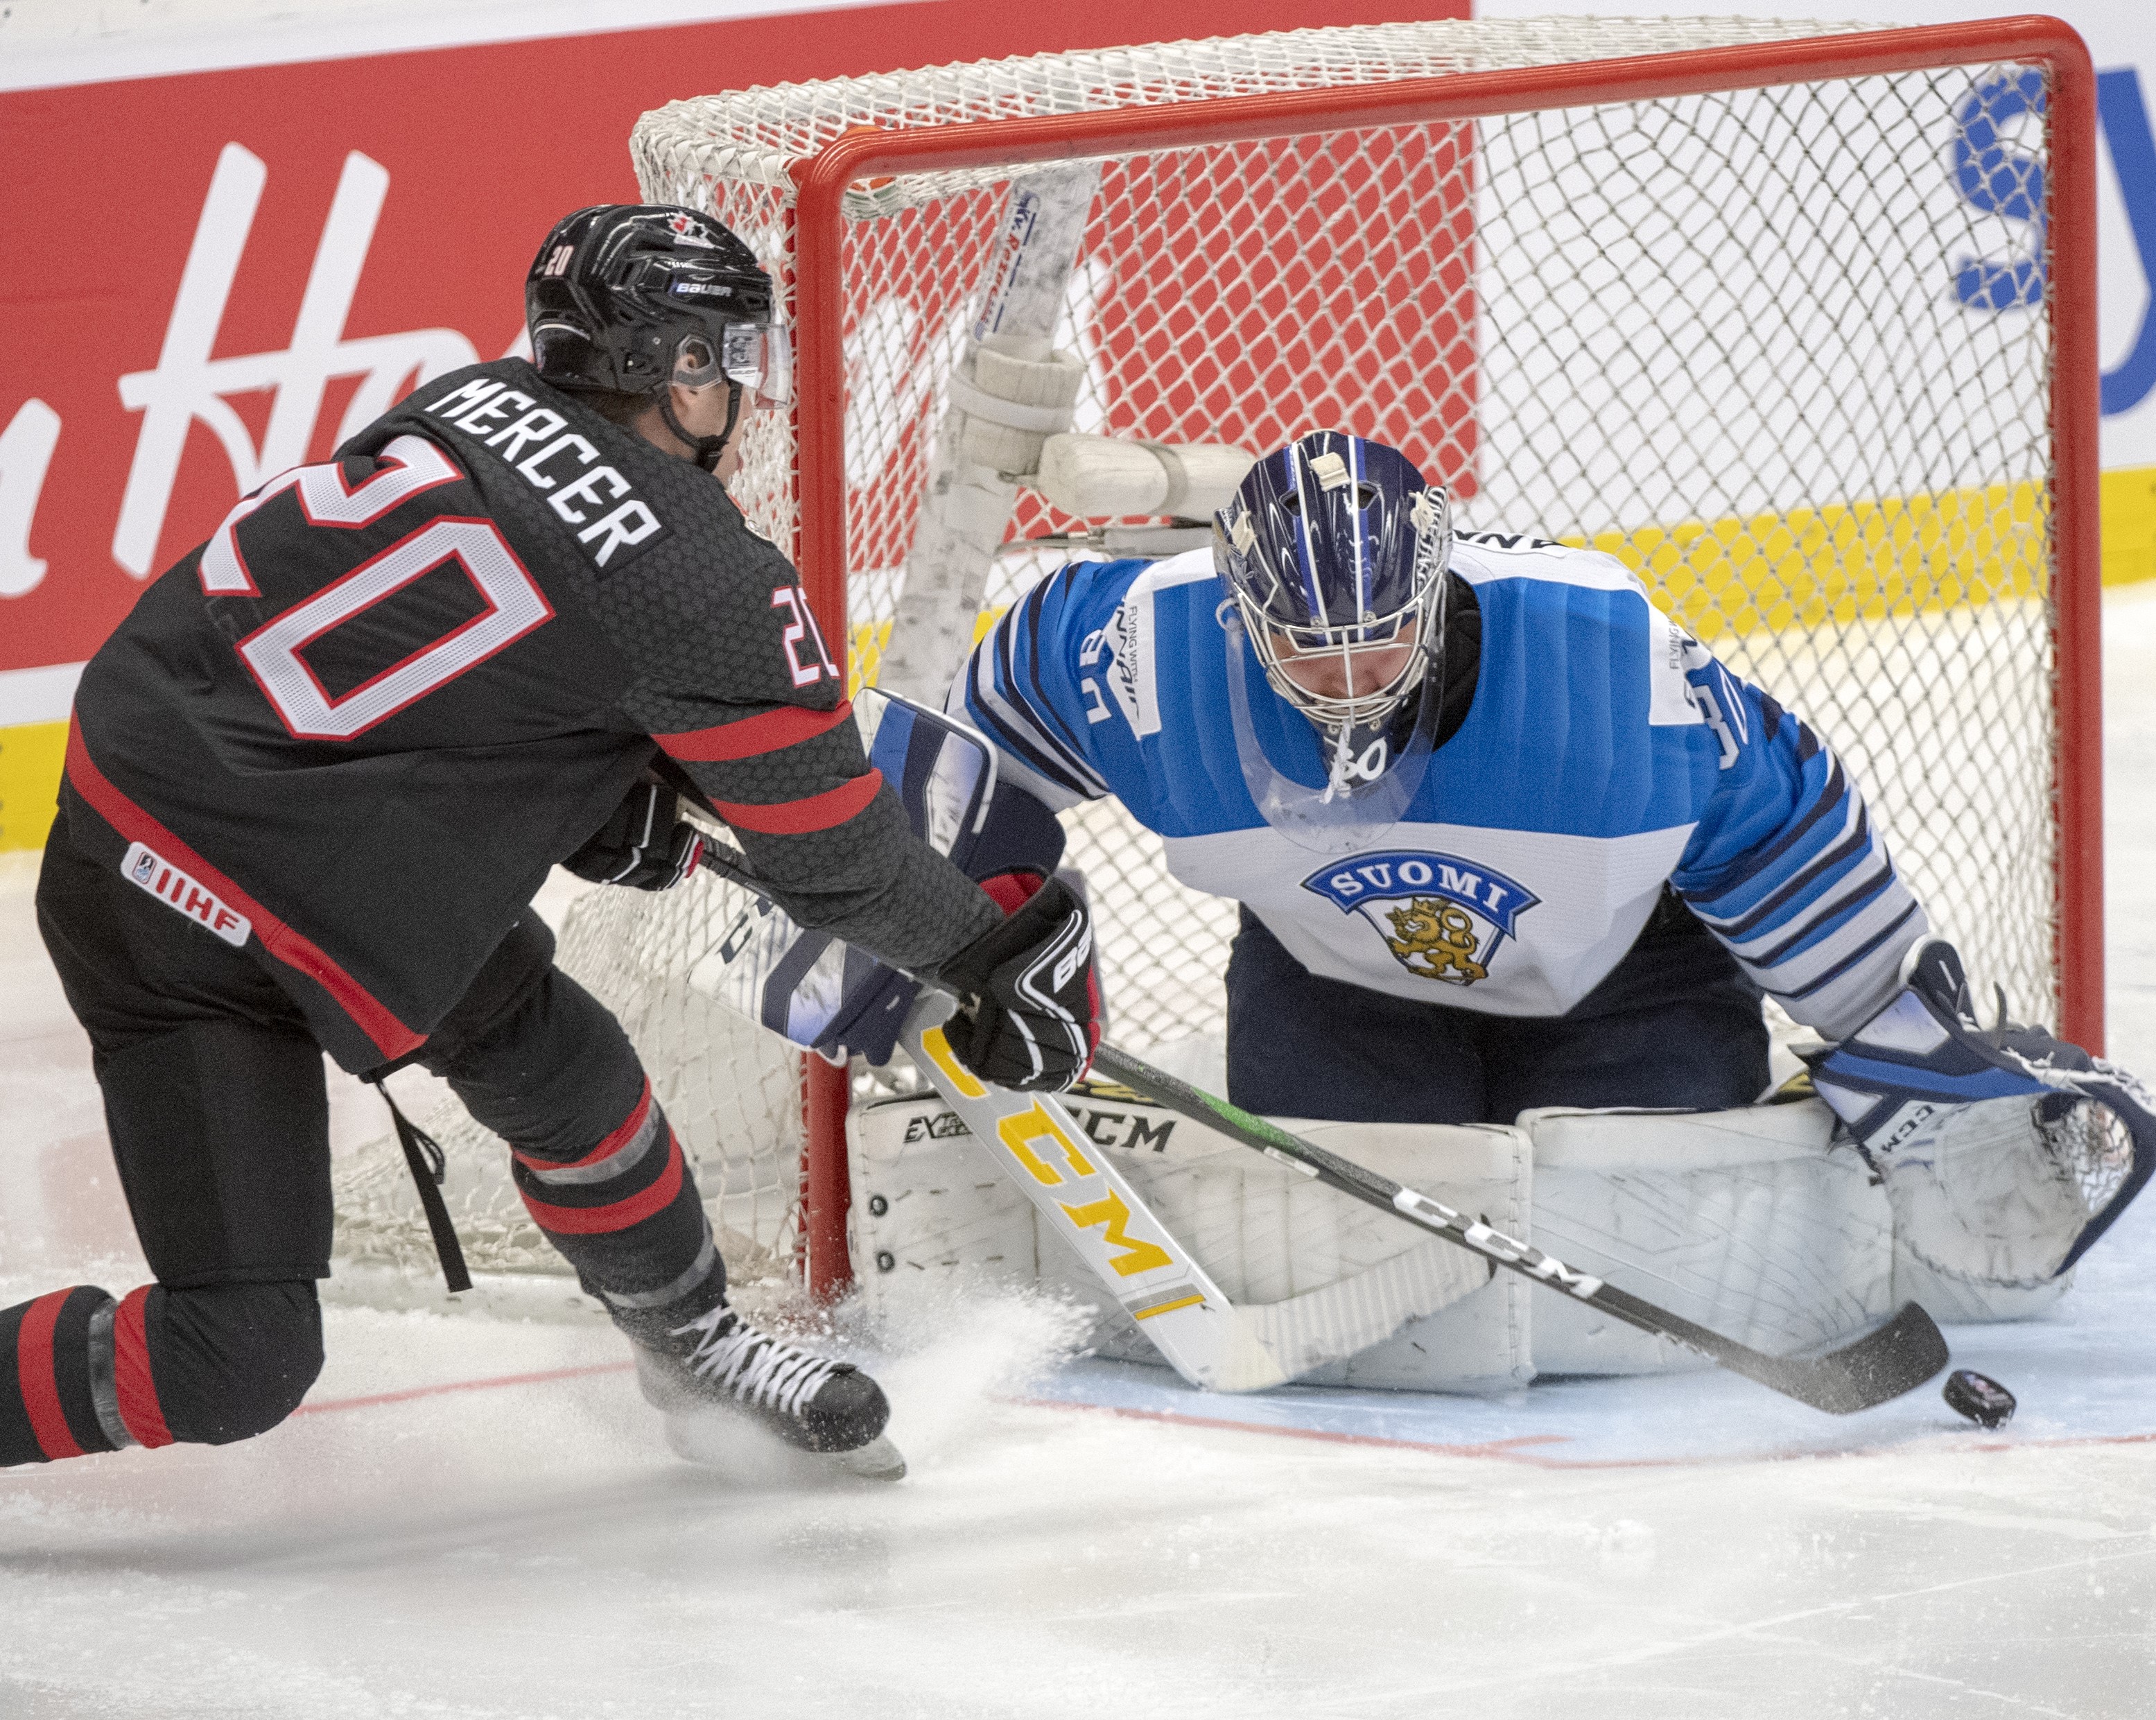 Canada's Dawson Mercer is stopped by Finland goaltender Justus Annunen during second period semifinal action at the World Junior Hockey Championships on Saturday, January 4, 2020 in Ostrava, Czech Republic. THE CANADIAN PRESS/Ryan Remiorz